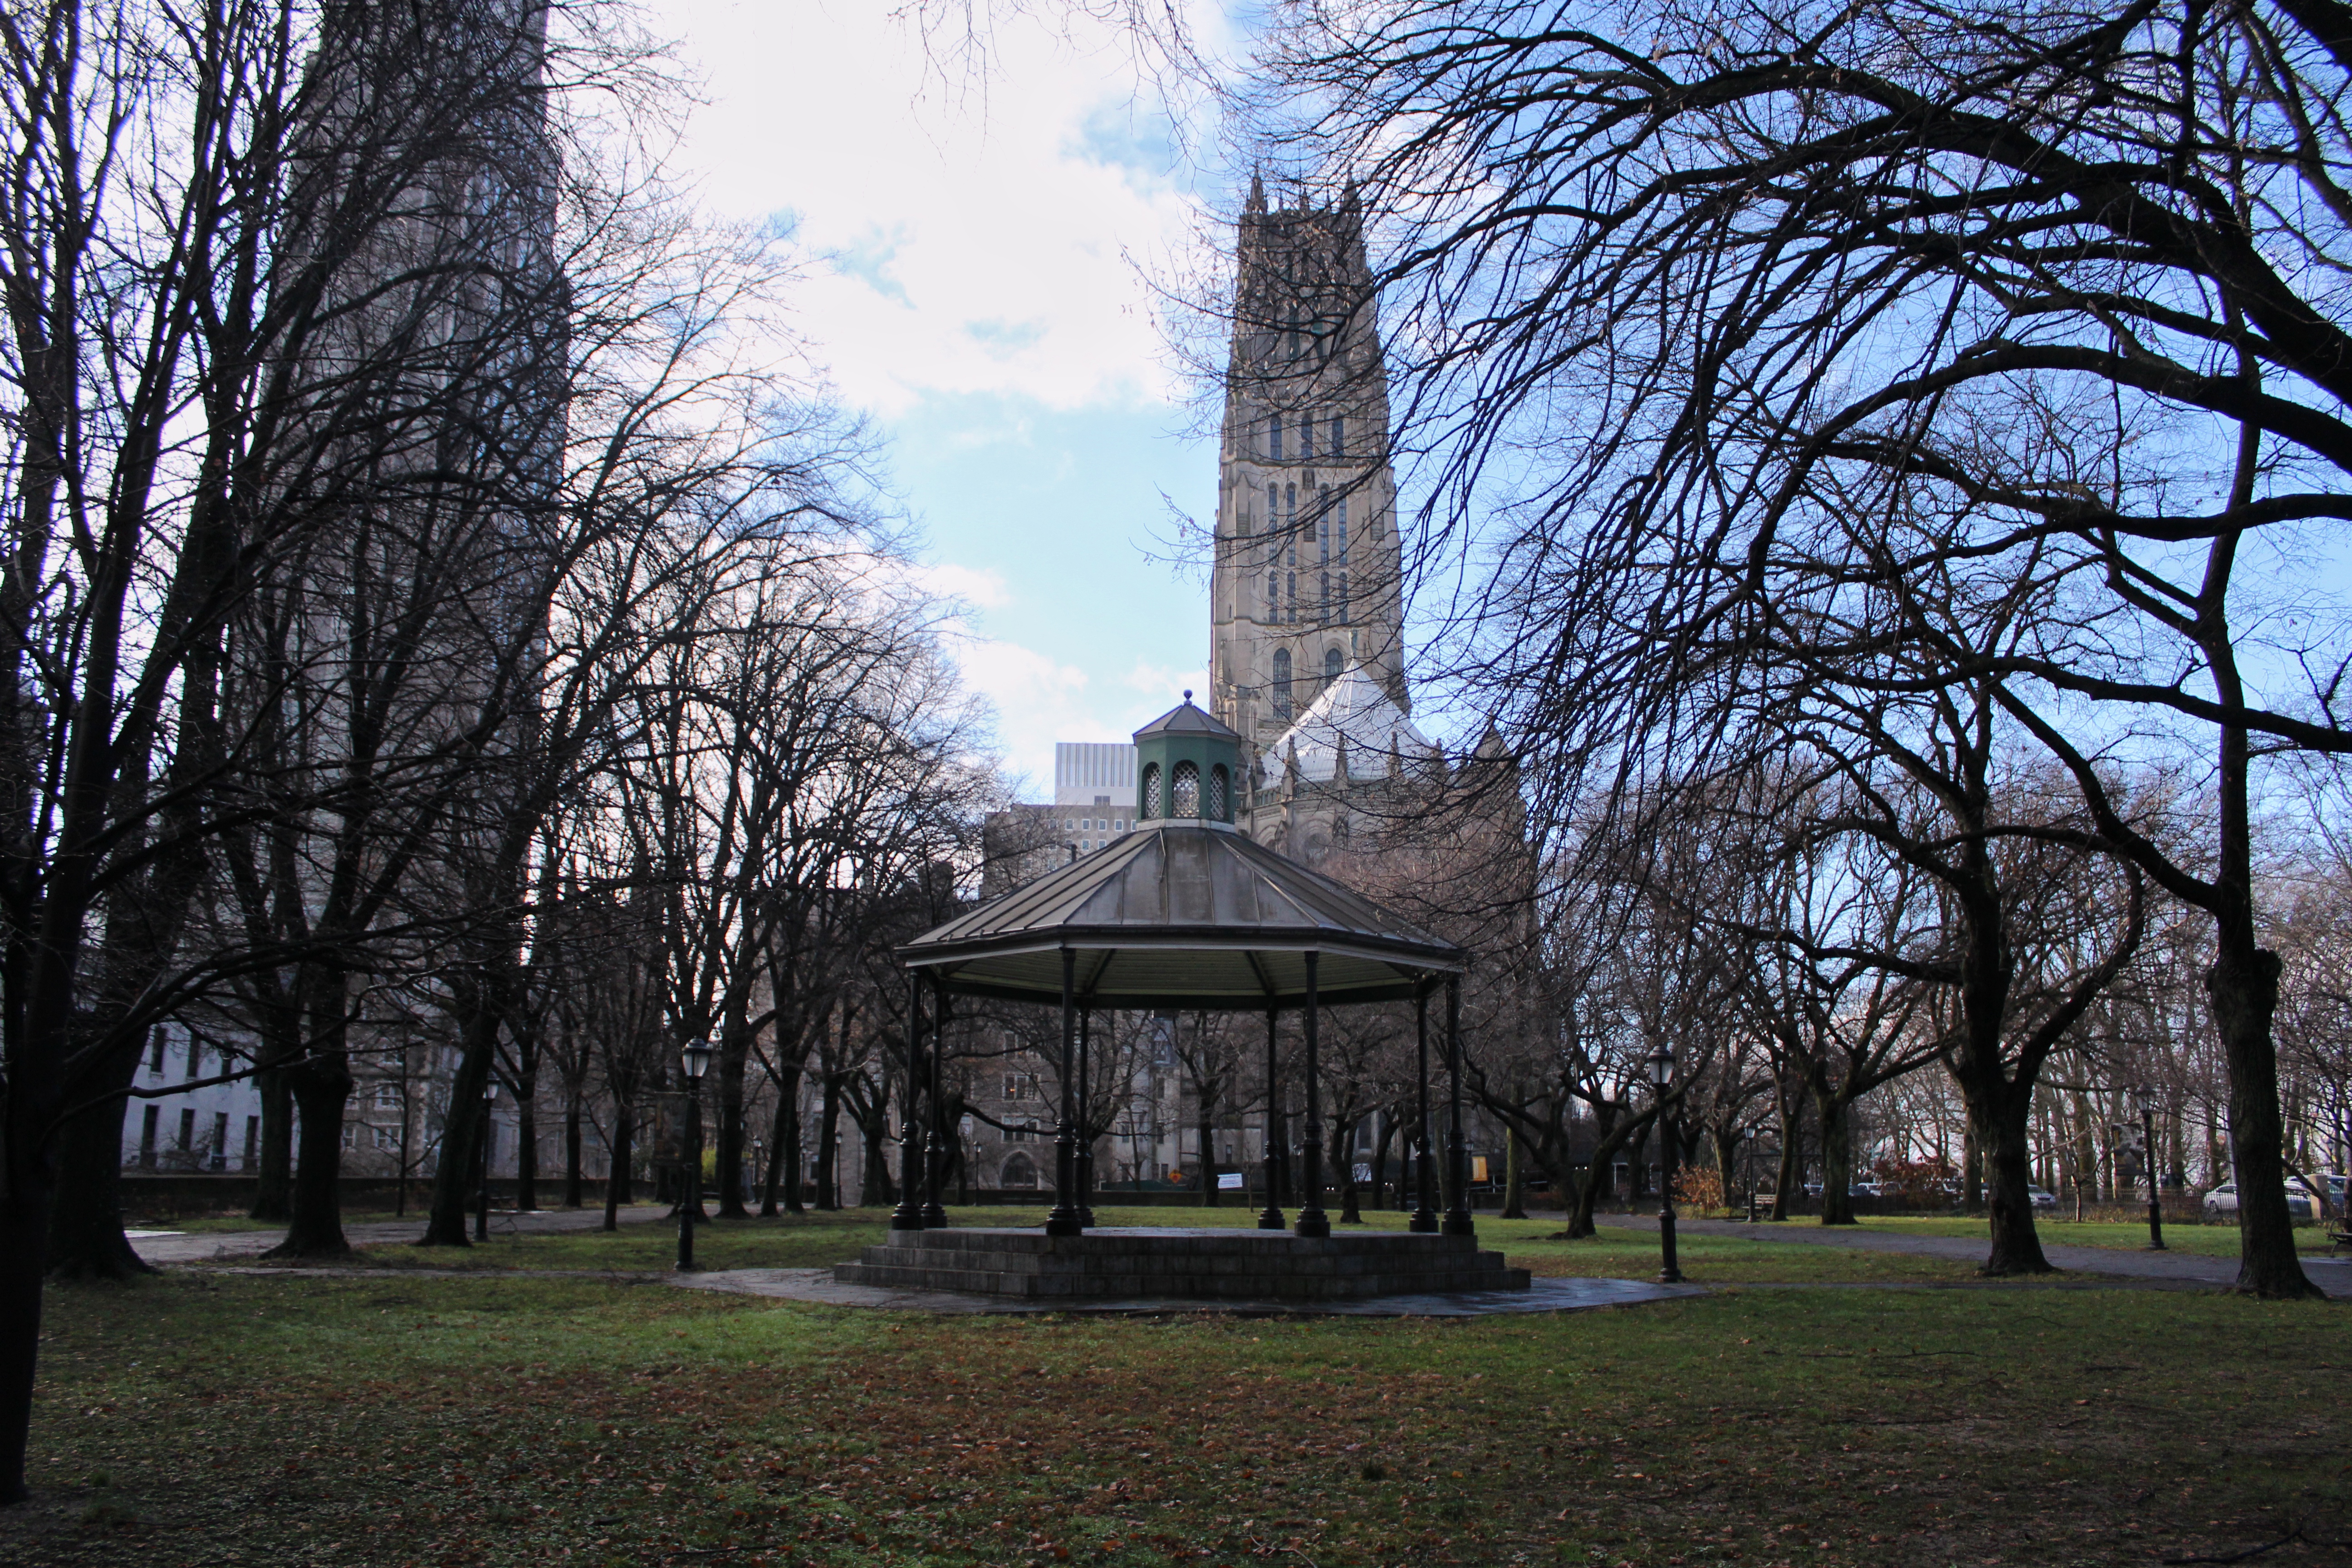 A park with barren trees with a church in the backdrop.